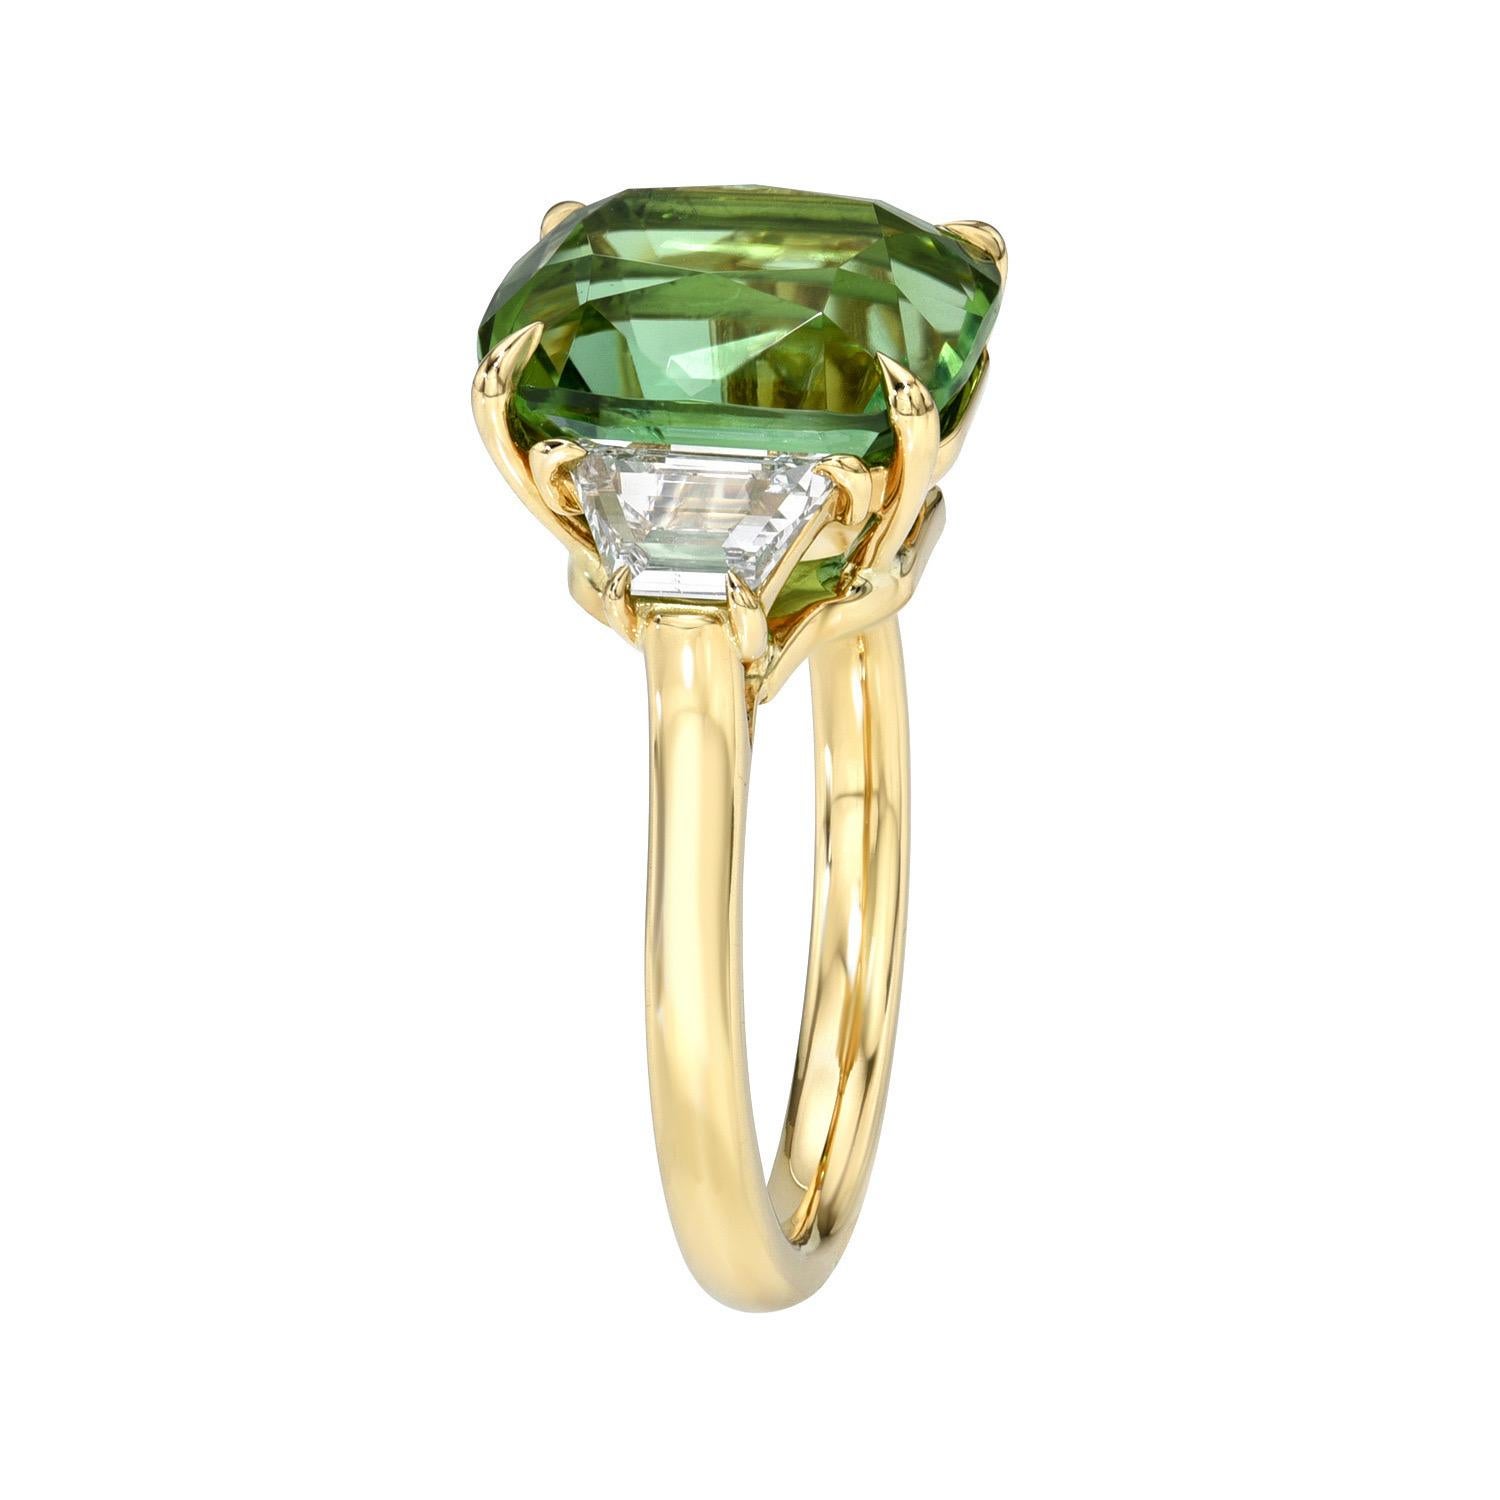 Marvelous 6.04 carat Apple Green Tourmaline oval 18K yellow gold three stone ring, decorated with a pair of 0.75 carats, E color/VS2-SI1 clarity, trapezoid diamonds.
Size 6. Re-sizing is complimentary upon request.
Returns are accepted and paid by